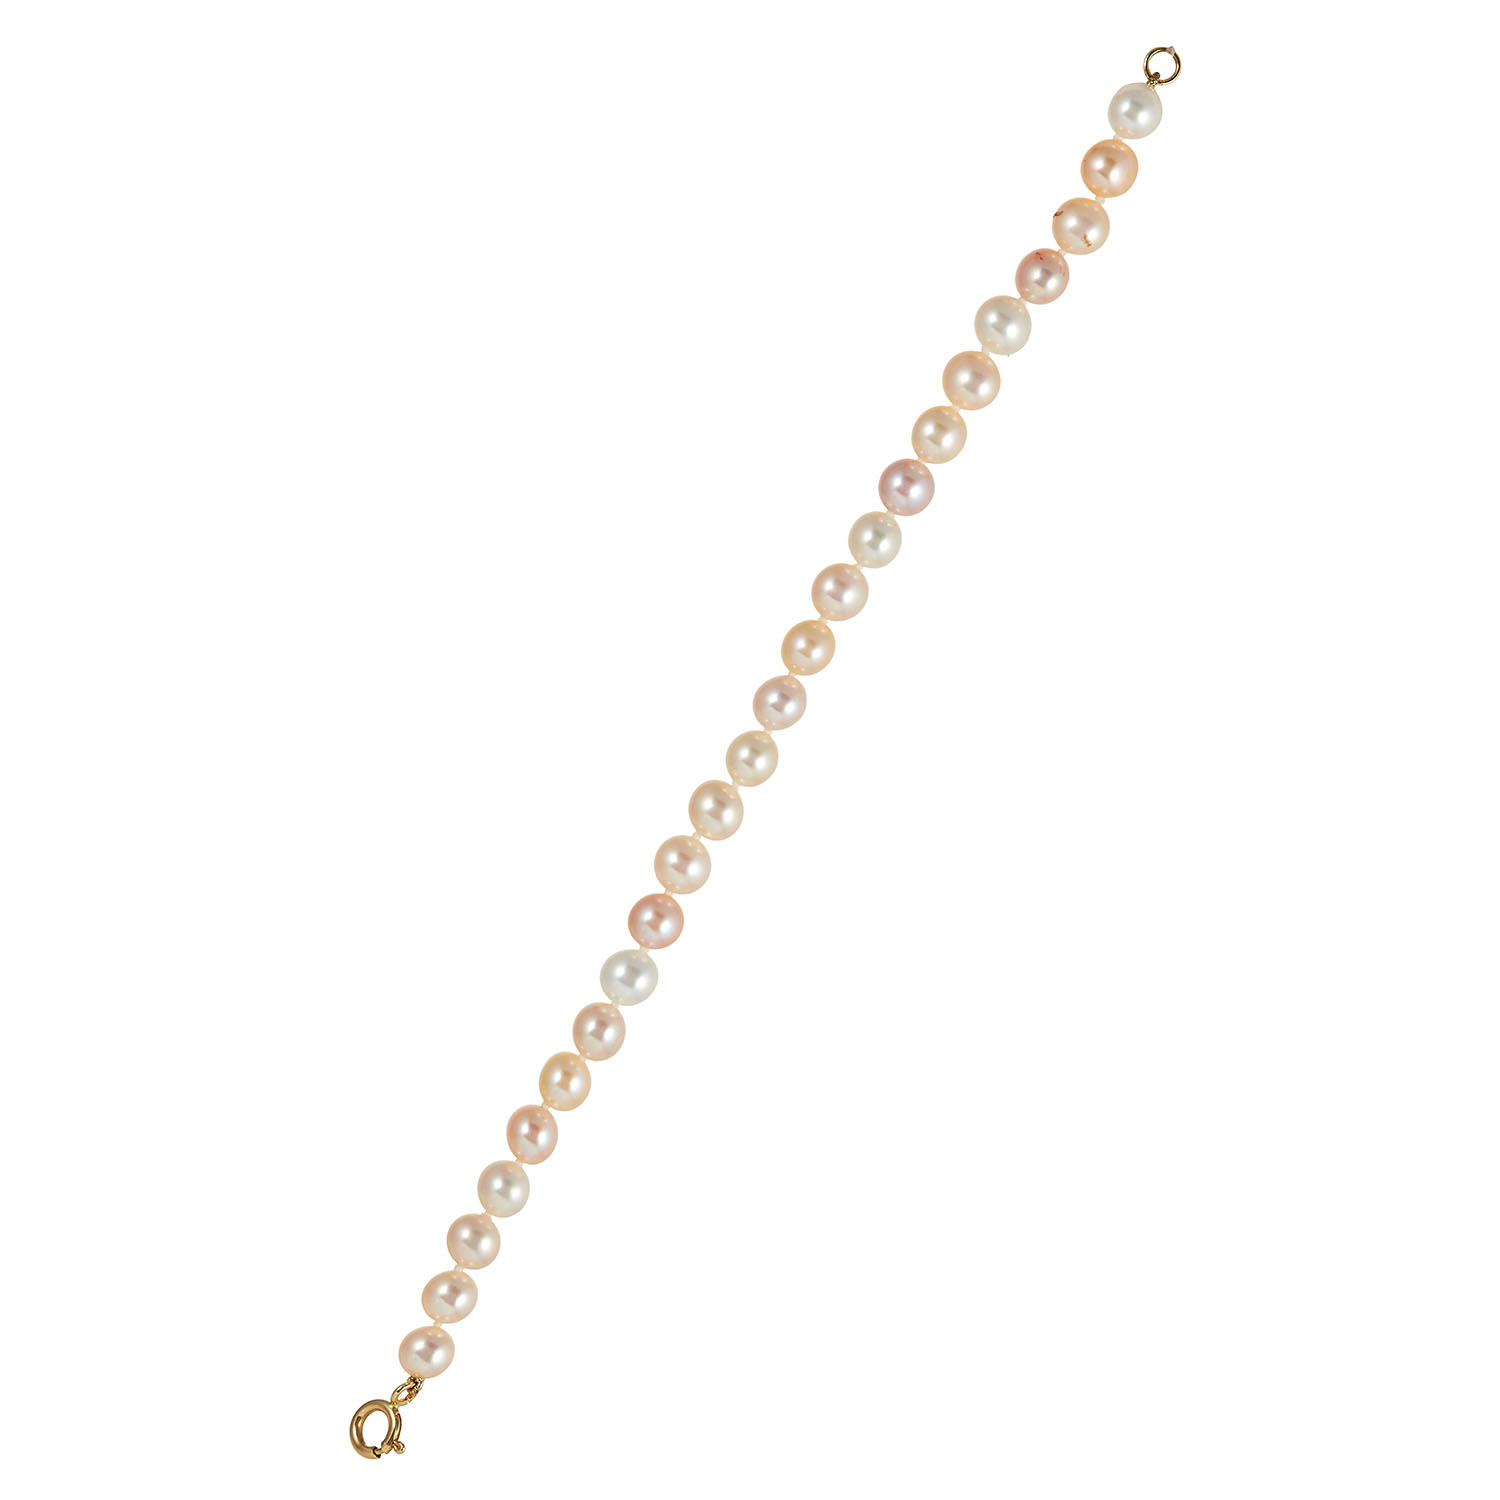 A PEARL BRACELET in 18ct yellow gold comprising a single row of twenty four pearls on a gold